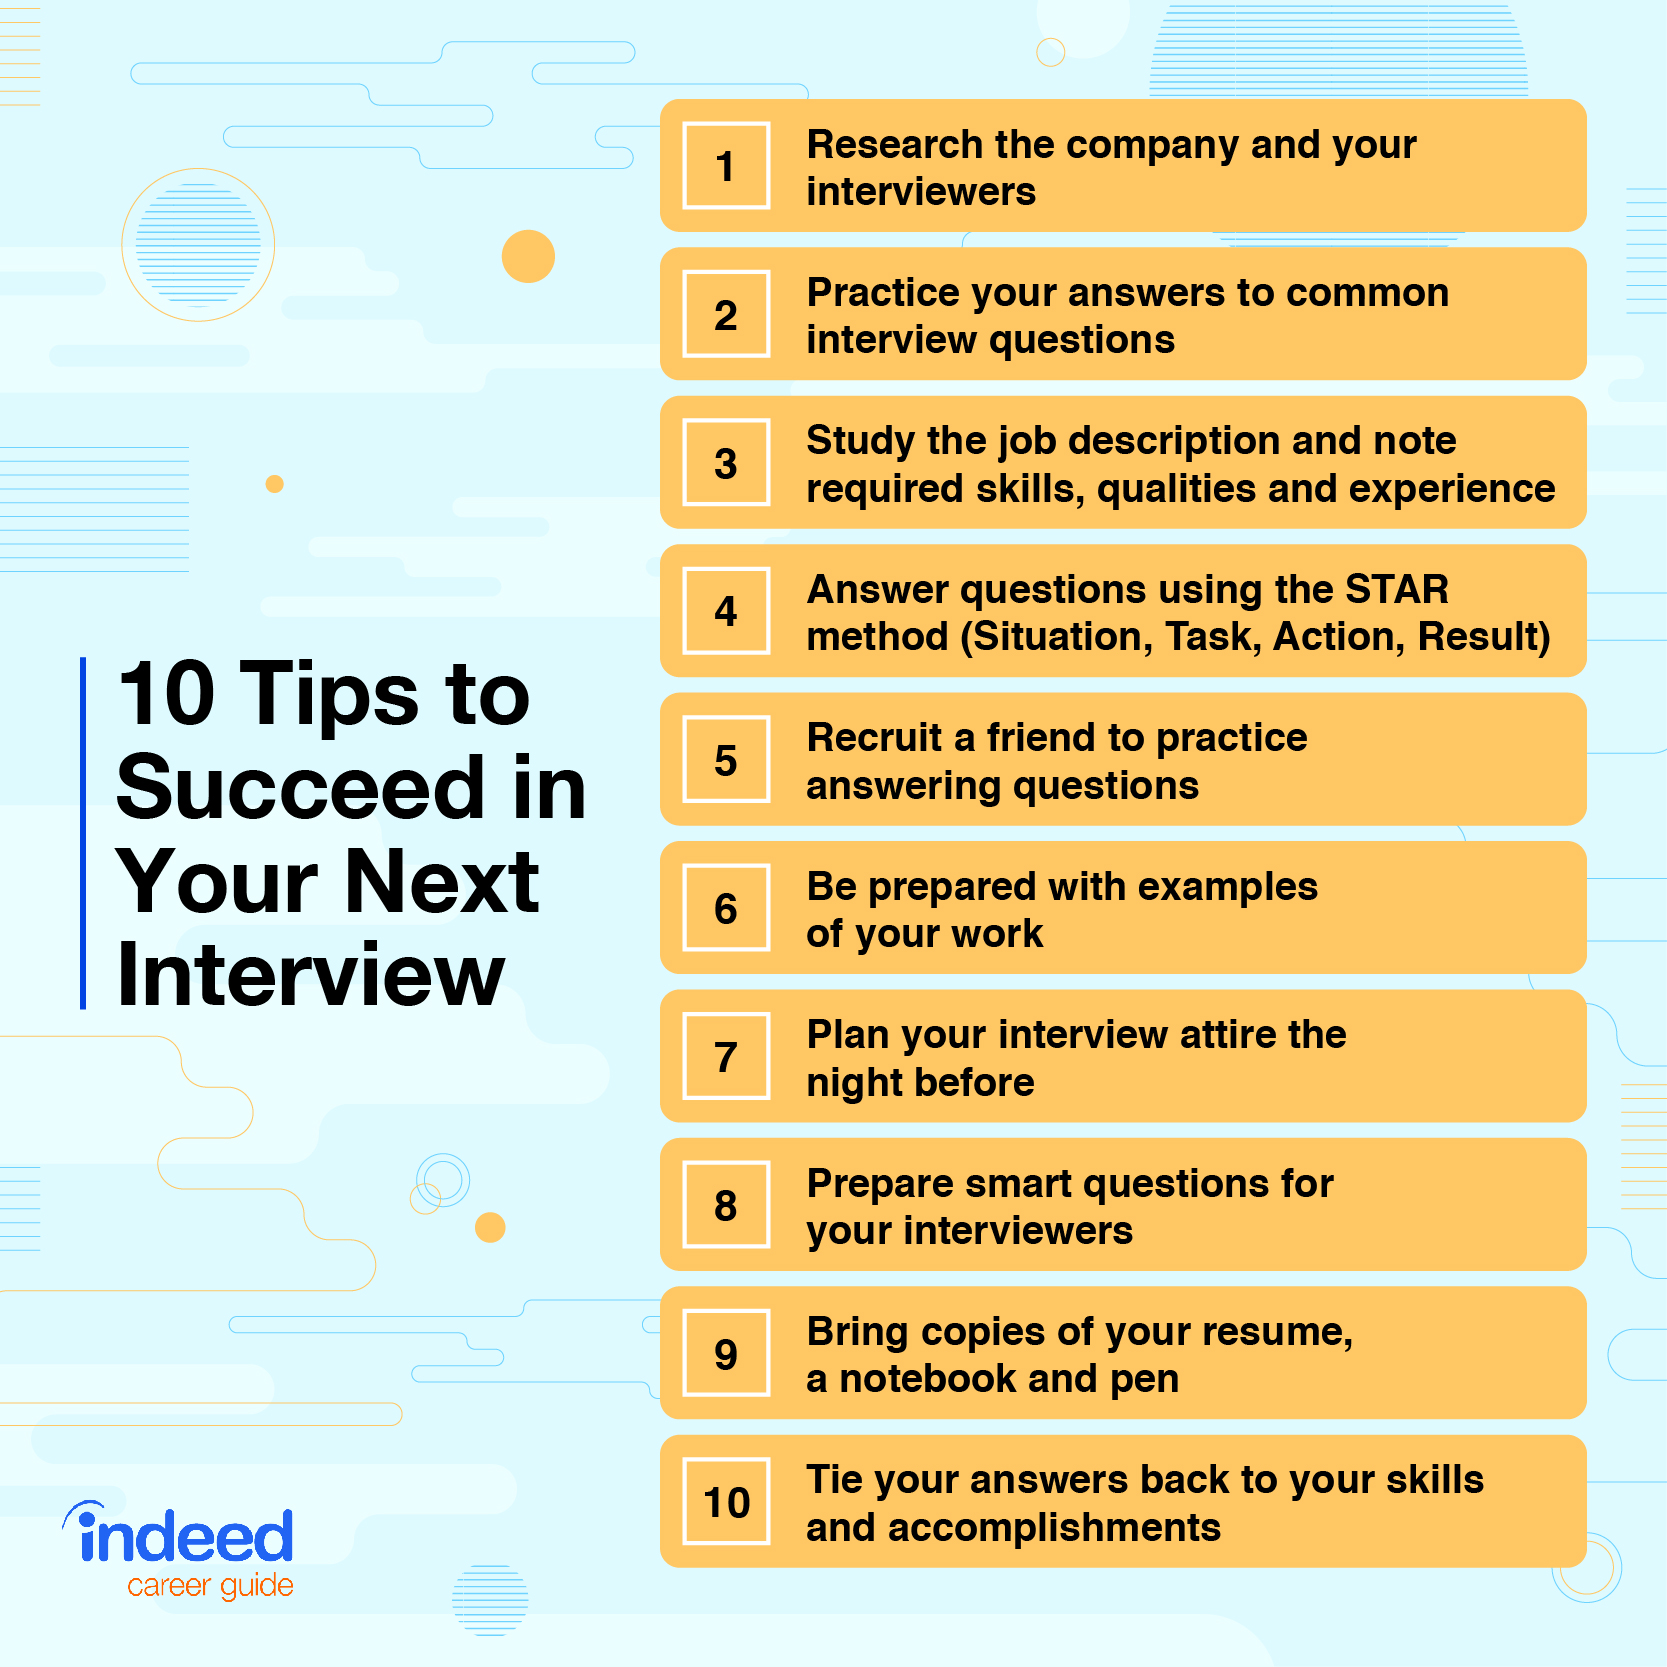 21-job-interview-tips-how-to-make-a-great-impression-https-gauday